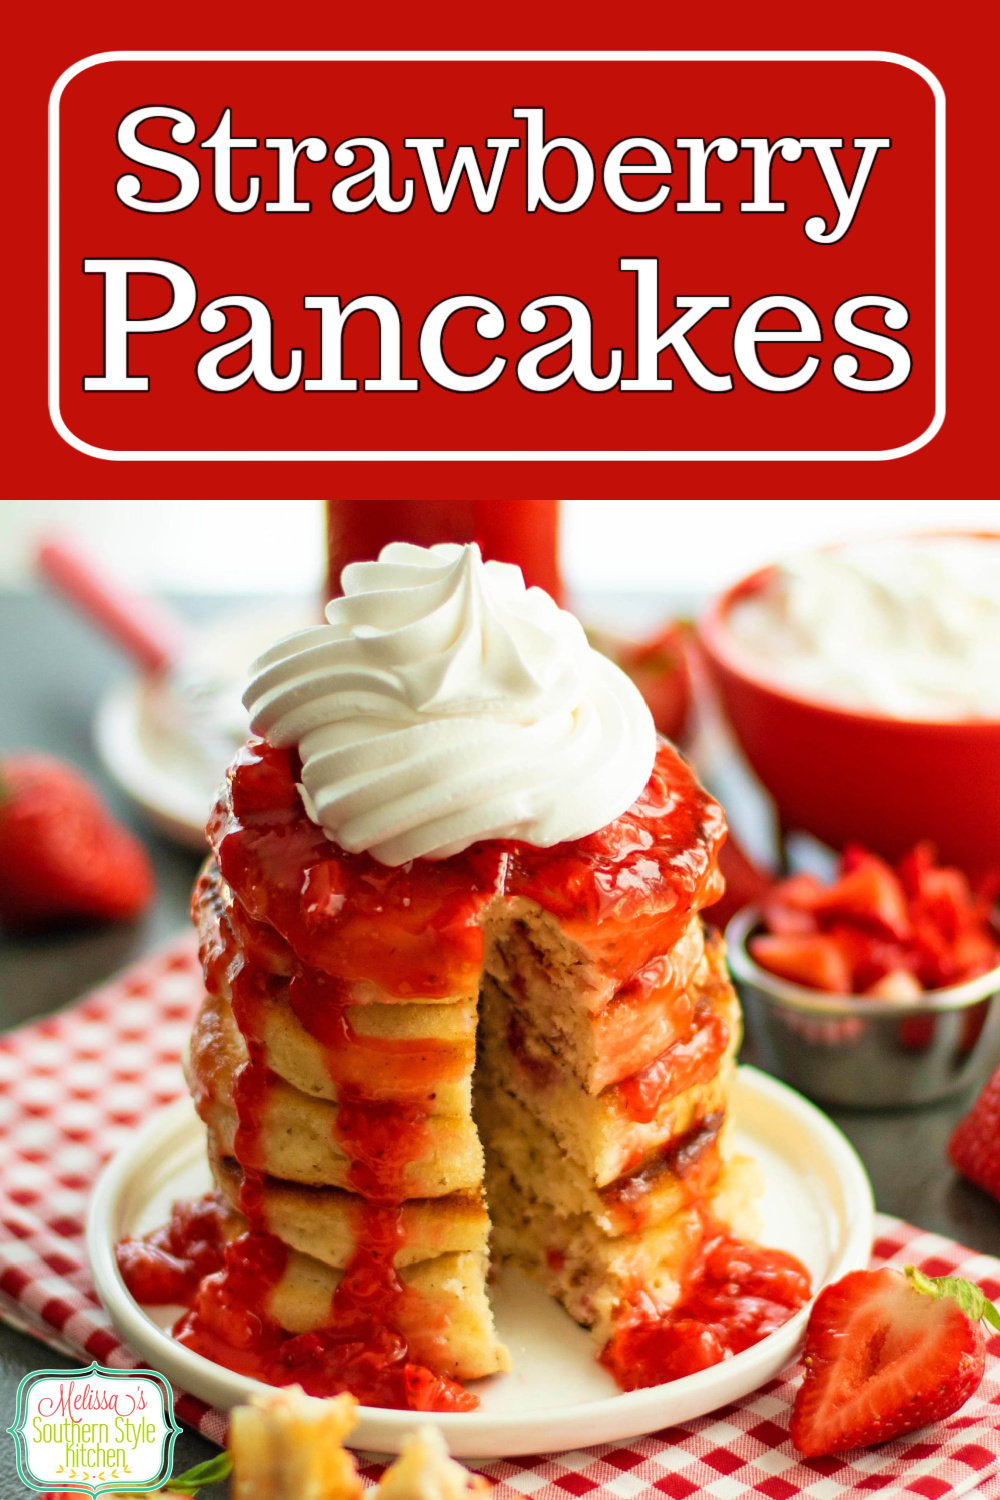 These fluffy Strawberry Pancakes are filled with fresh strawberries and topped with homemade strawberry sauce and a dollop of whipped cream. #strawberrypancakes #buttermilkpancakes #pancakerecipes #strawberries #stgraberrydesserts #brunchrecipes #strawberryshortcake via @melissasssk